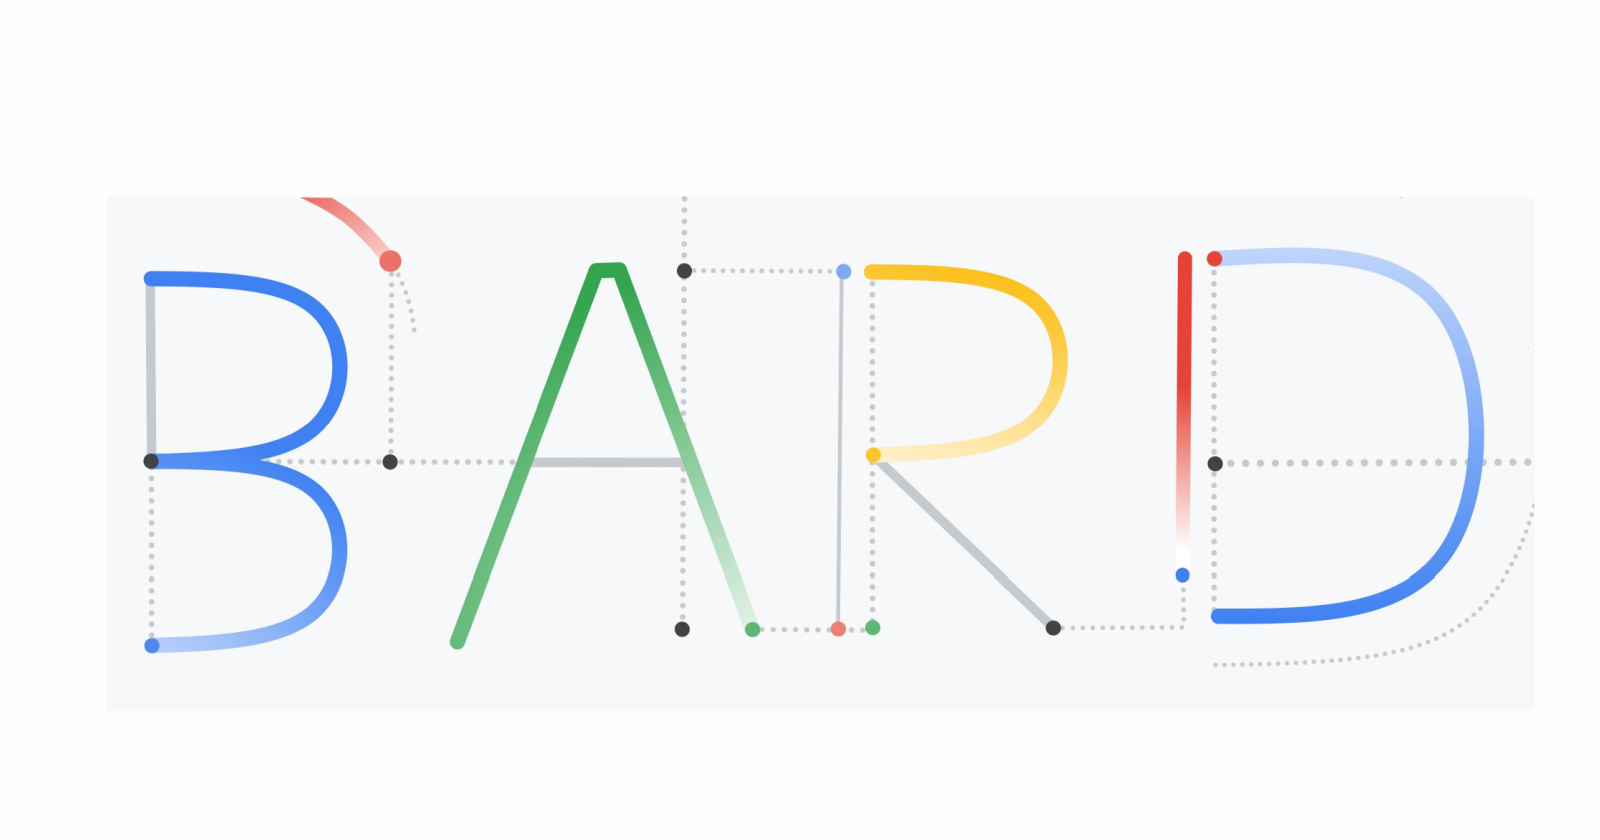 Google Bard: Everything You Need To Know